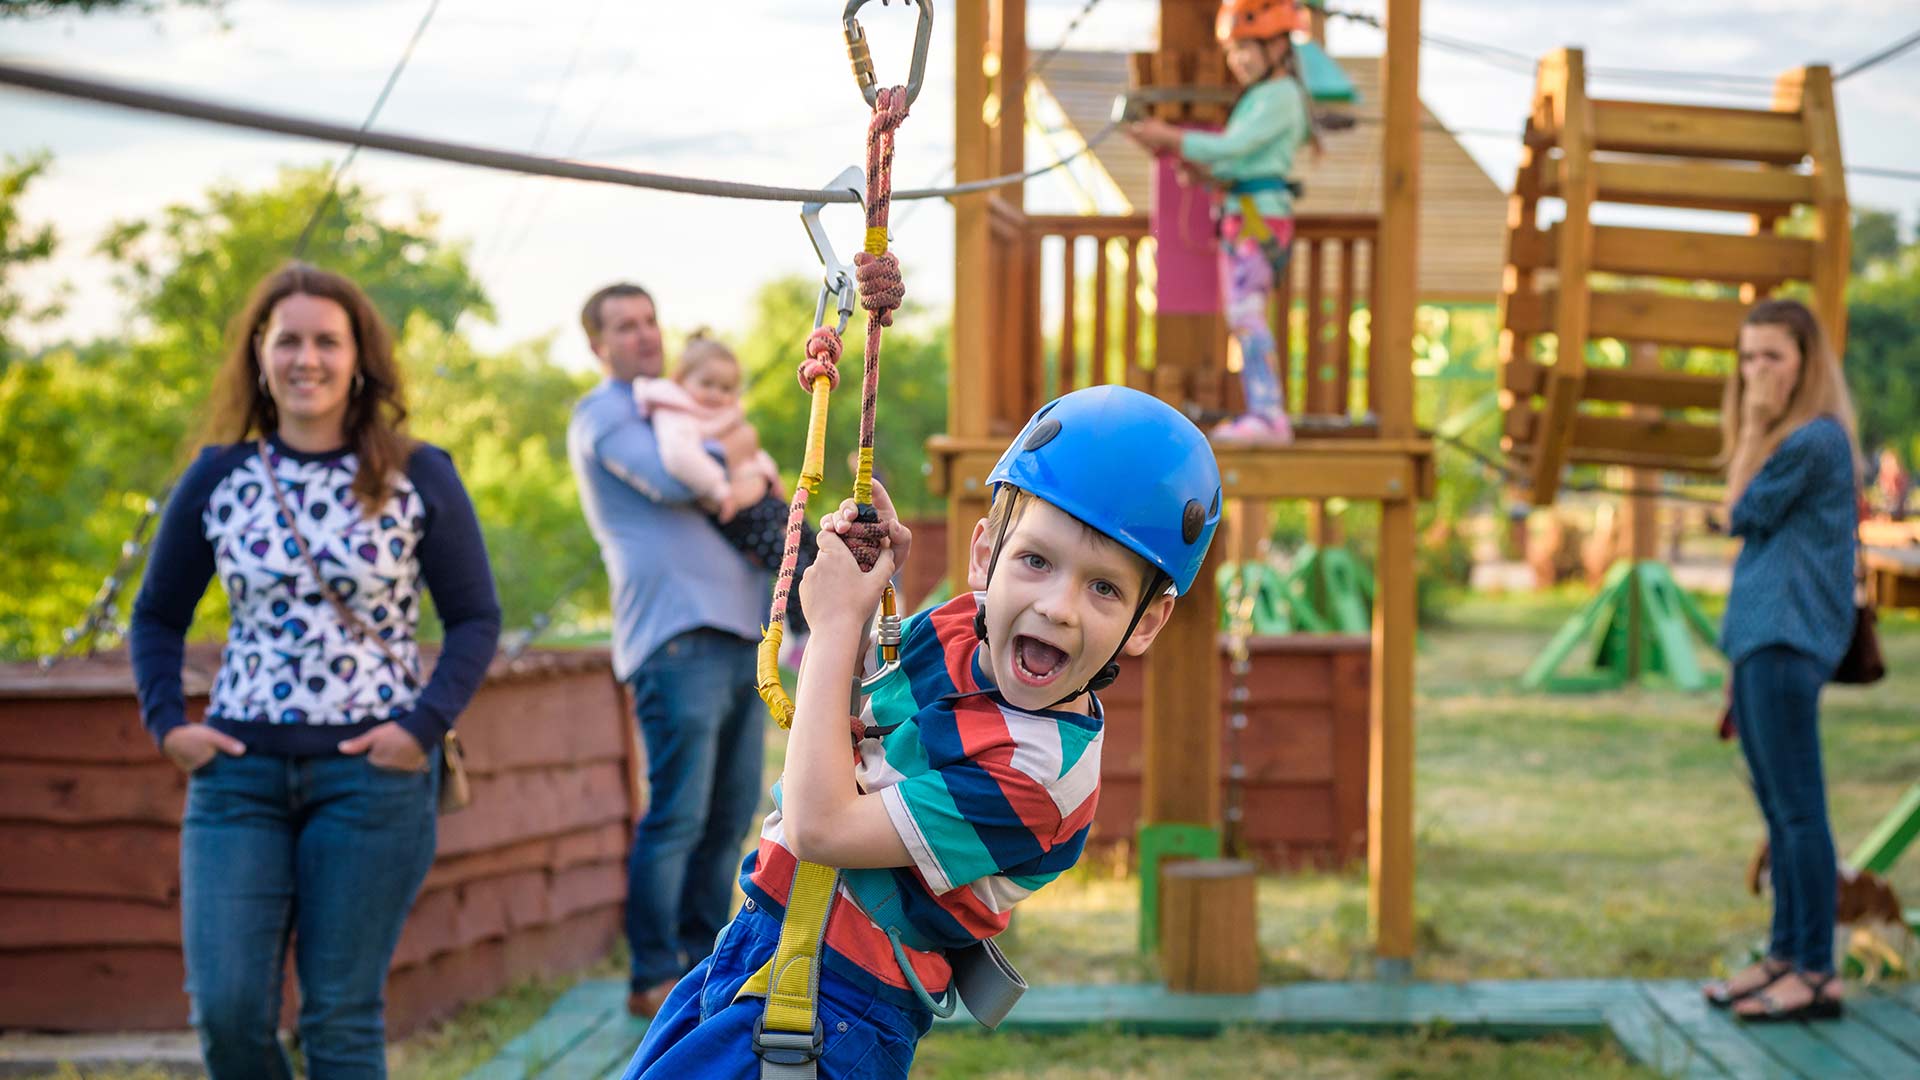 Boy gliding on a rope course with parents watching